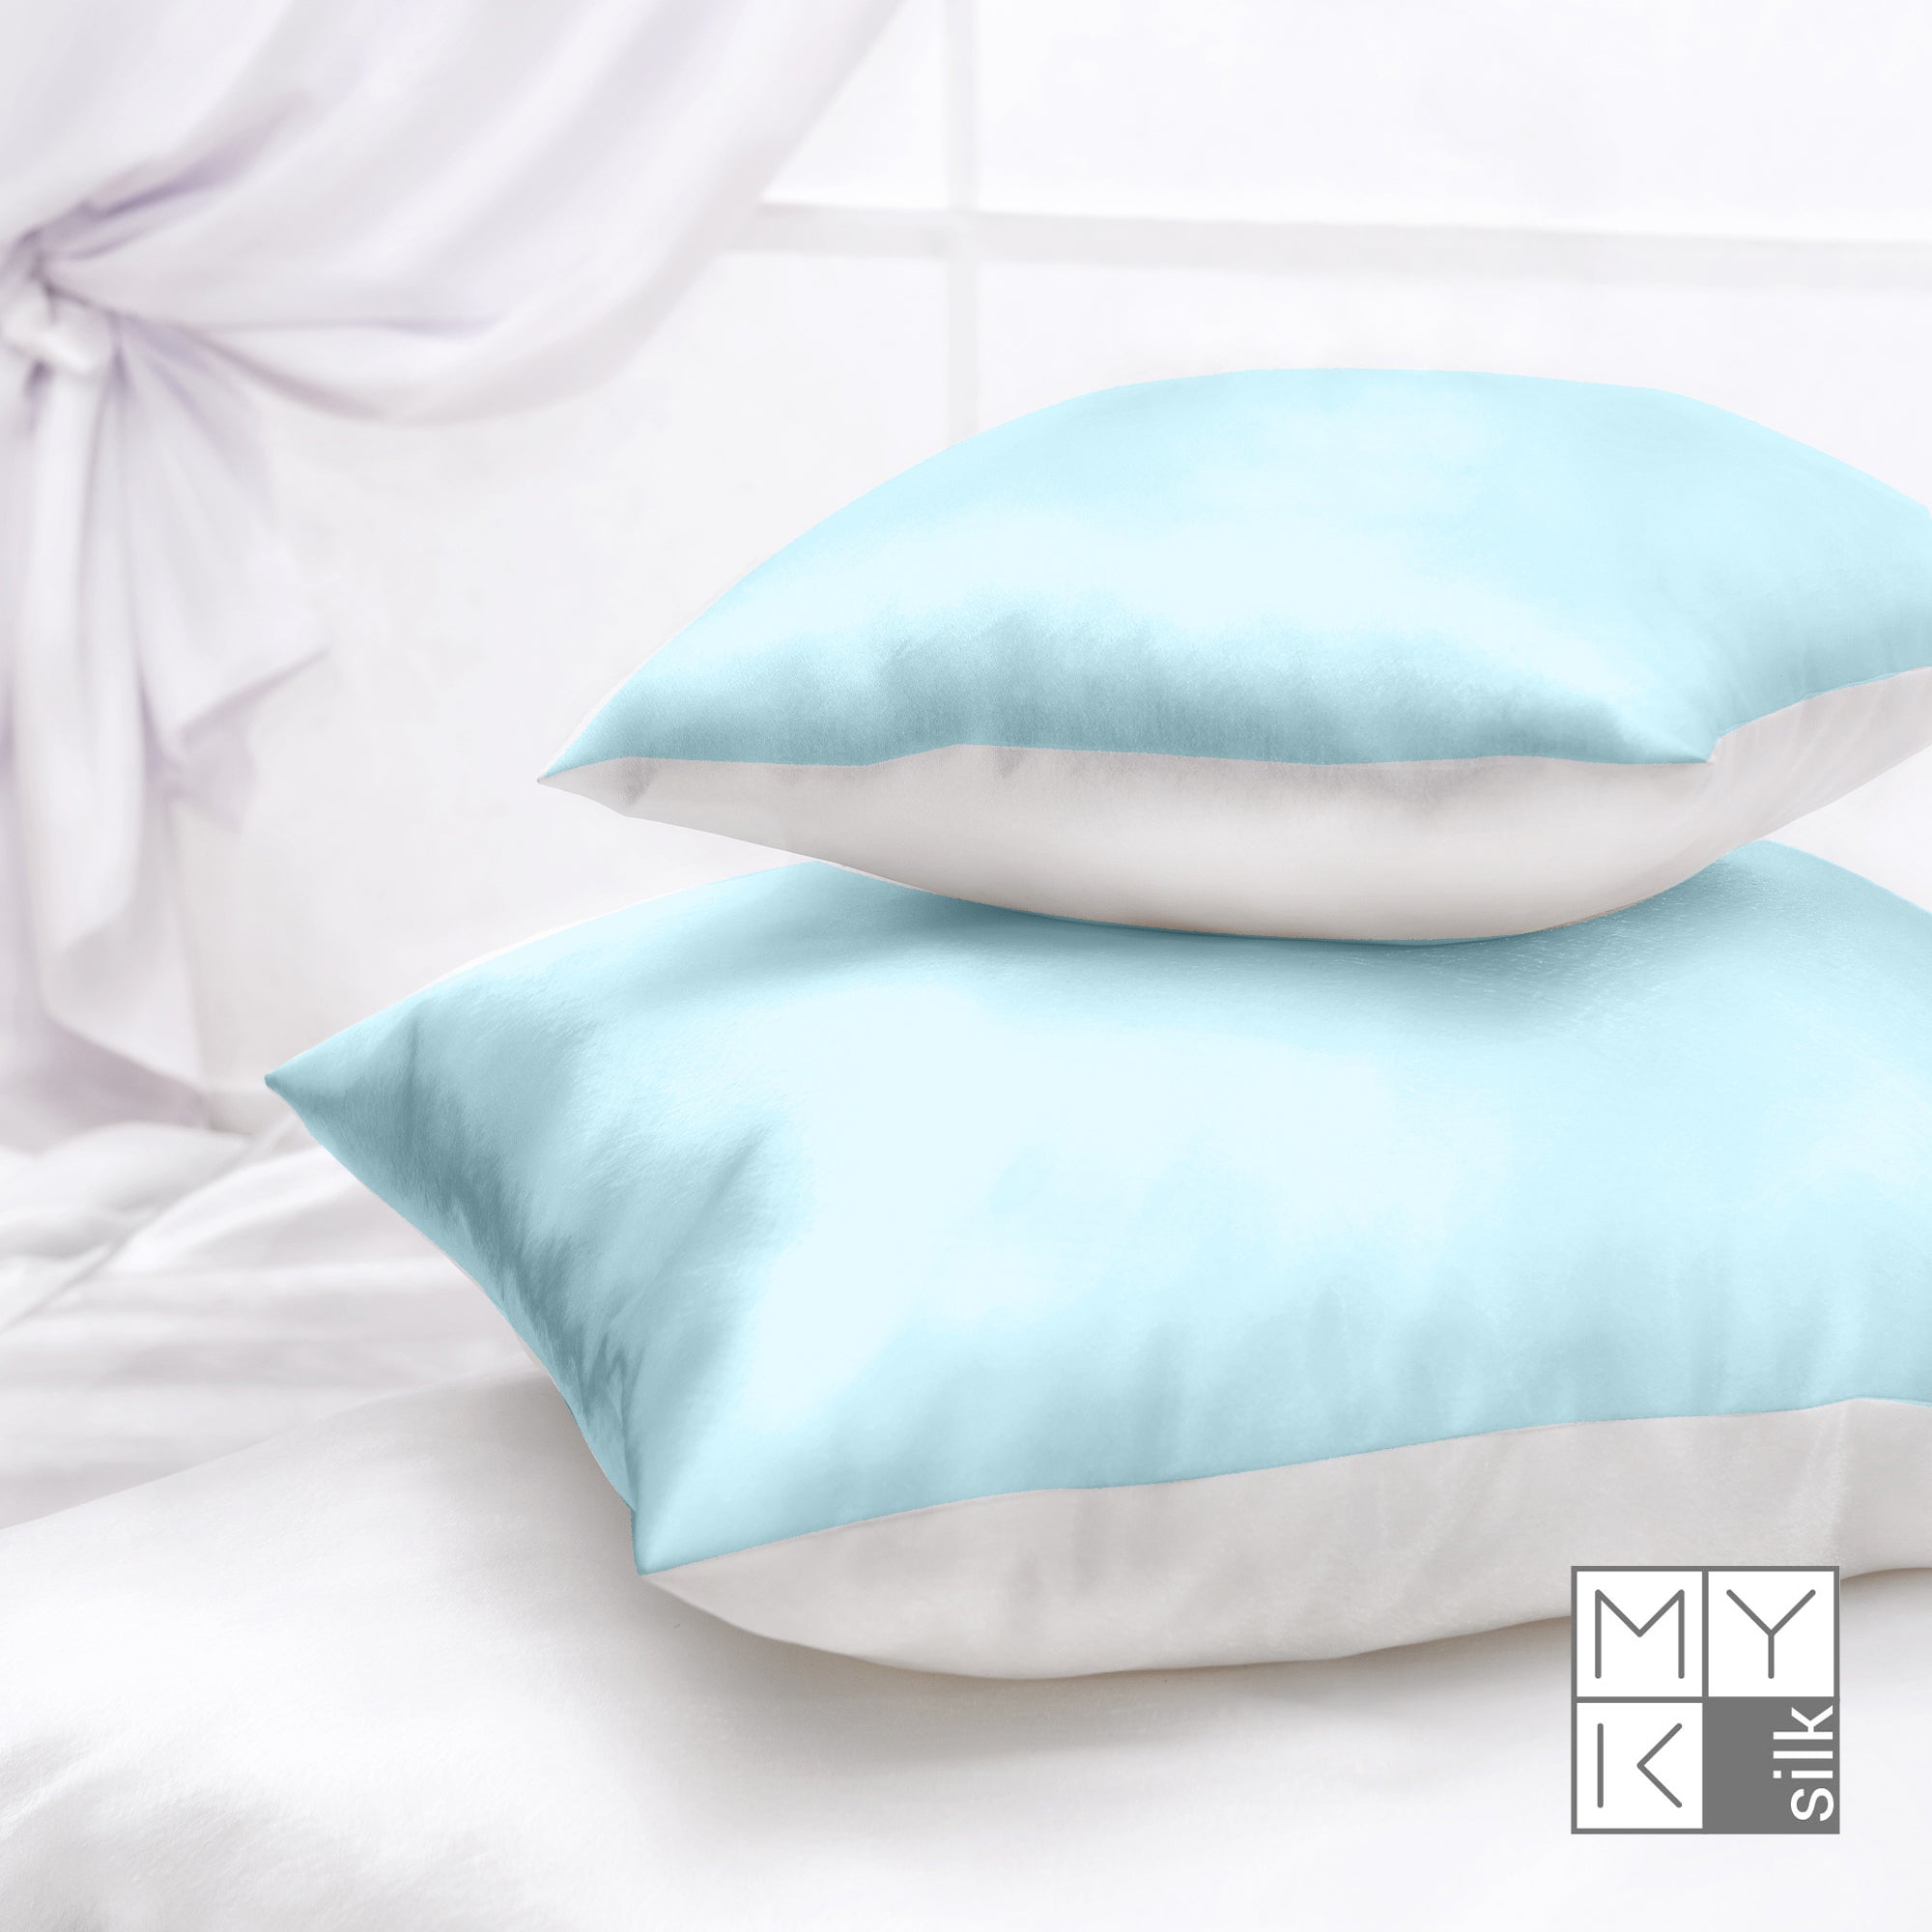 Products Luxury Mulberry Silk Pillowcase with Cotton Underside (25 momme) - MYK Silk #color_light blue